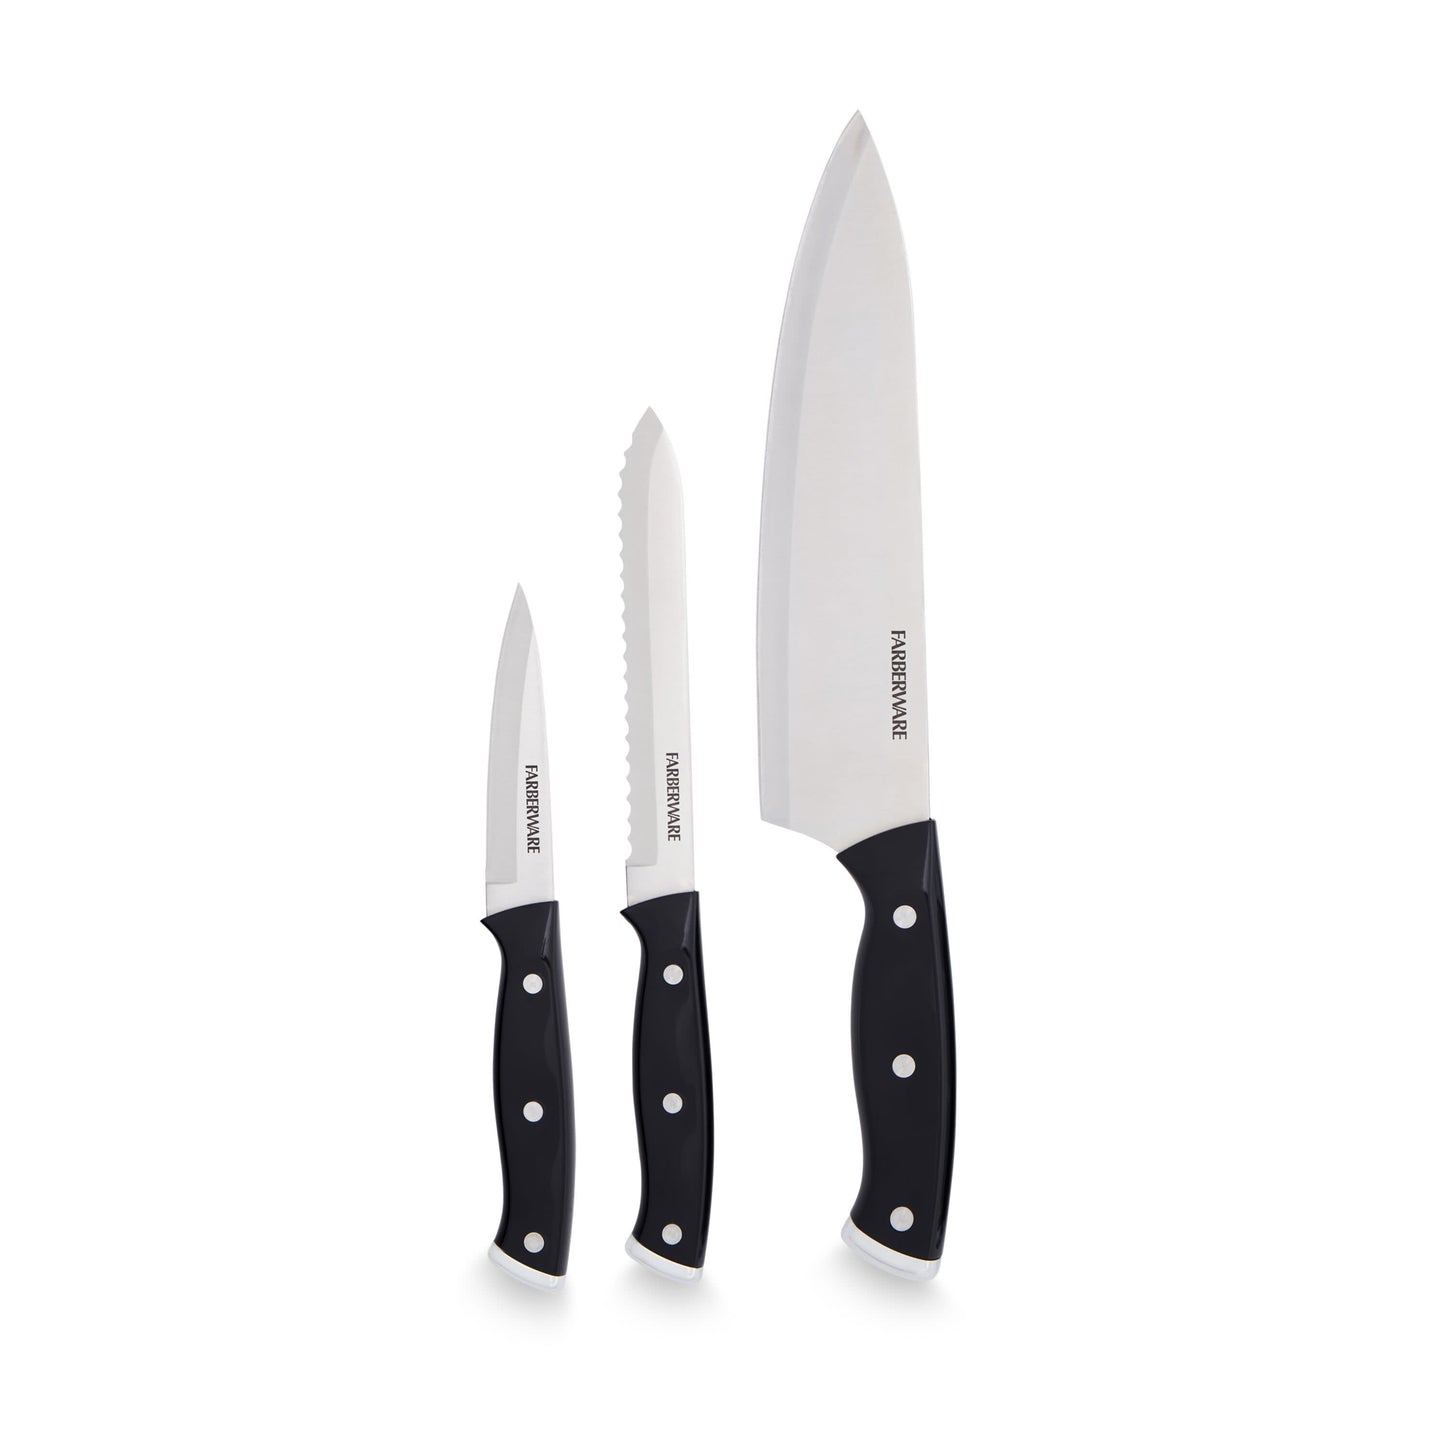 Farberware Classic 3-piece Triple Riveted Knife Set with Endcap and Black Handle